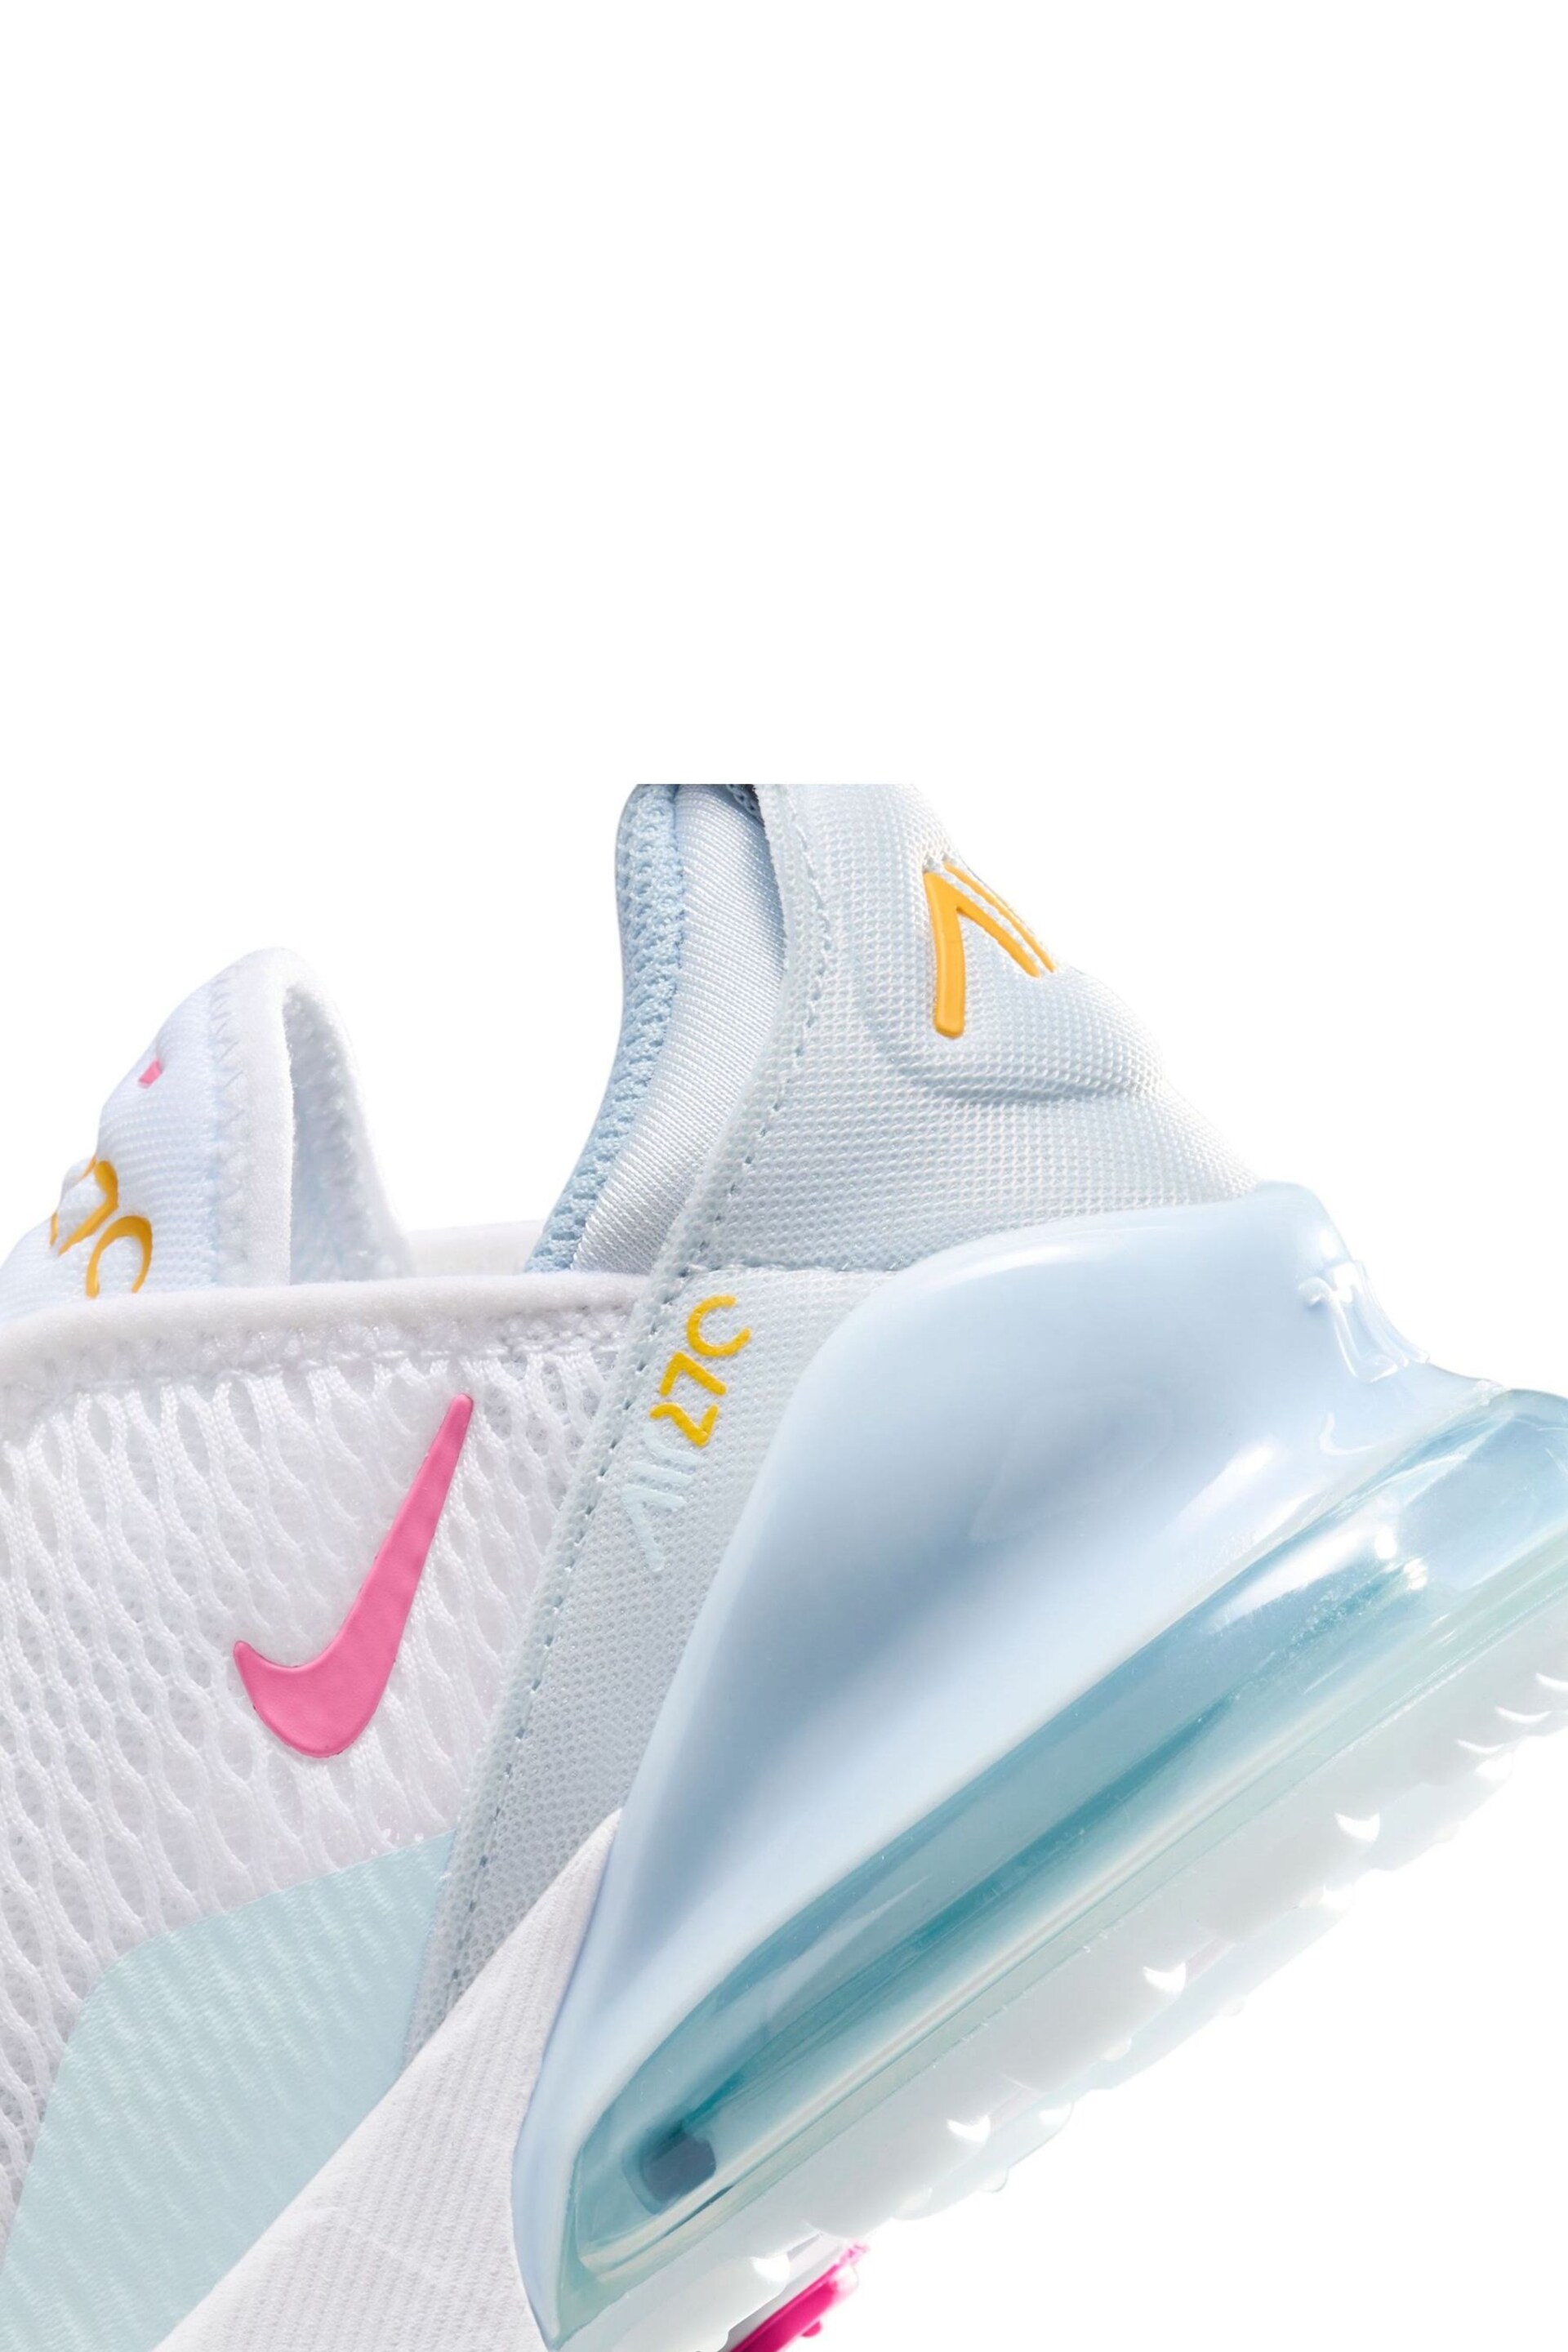 Nike White/Pink Air Max 270 Little Kids' Shoe - Image 8 of 8